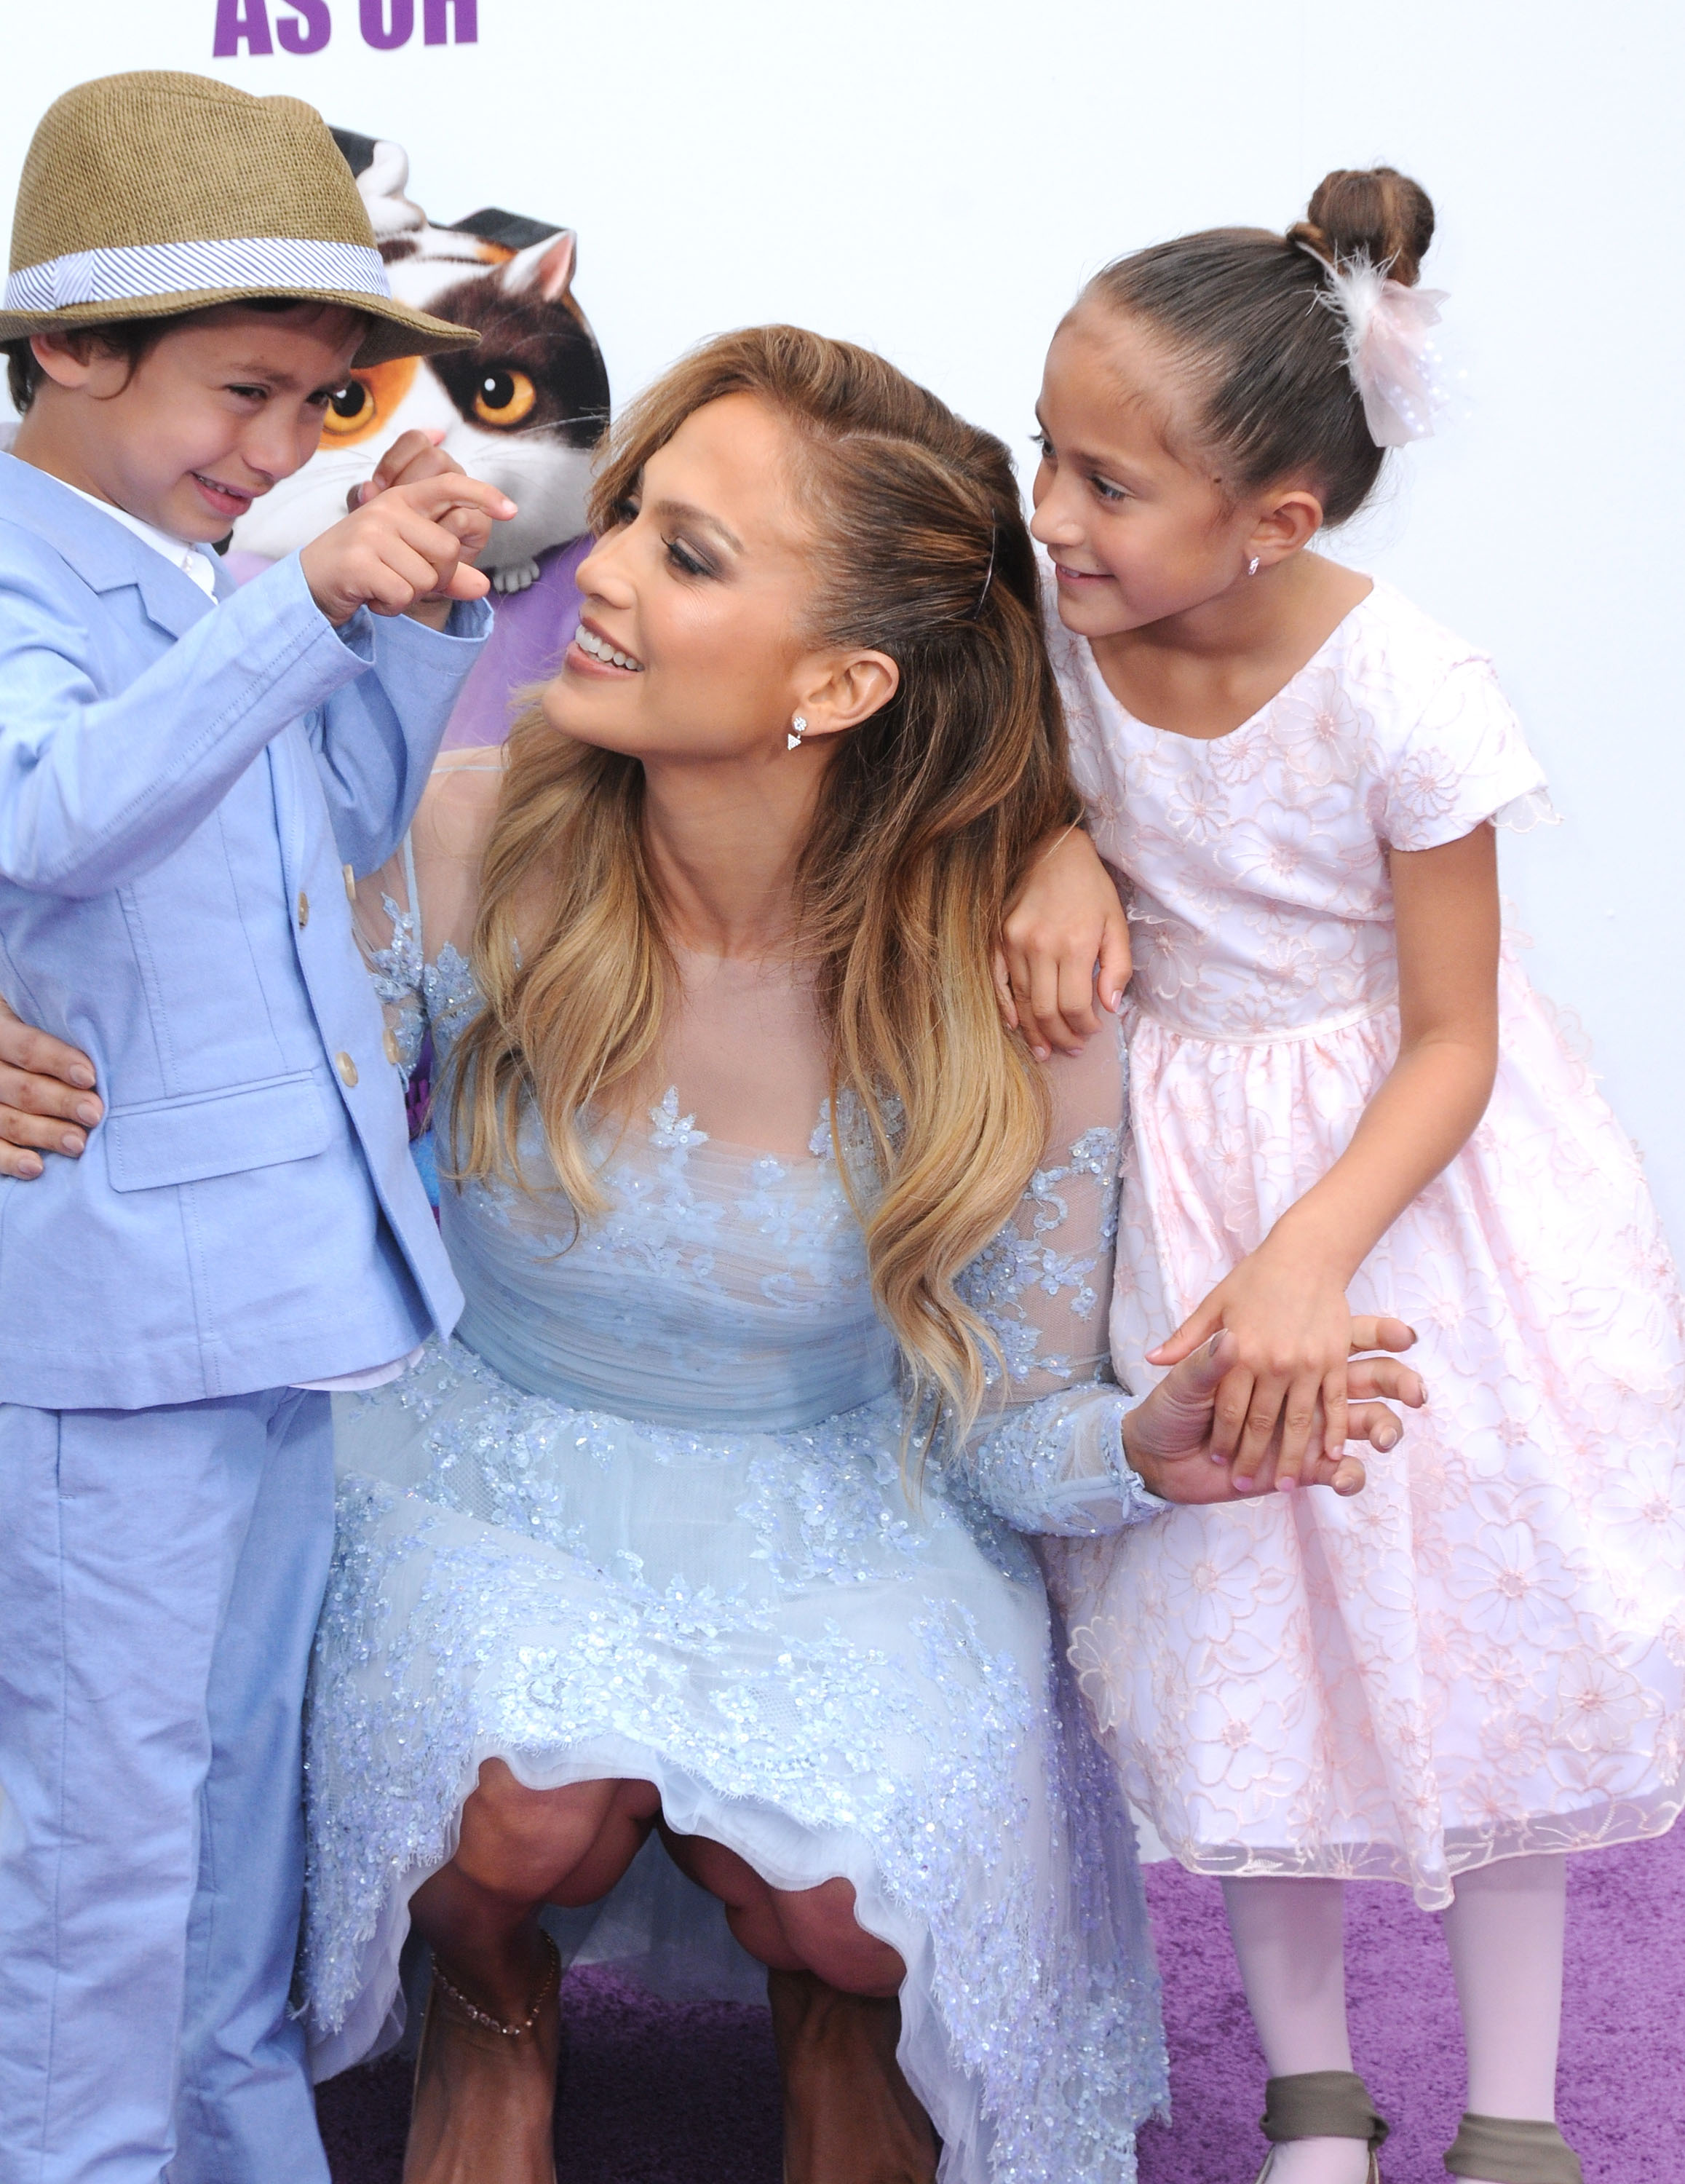 Jennifer Lopez, accompanied by her son Maximillian David Muniz and daughter Emme Maribel Muniz, graces the premiere of Twentieth Century Fox and Dreamworks Animation's "Home" on March 22, 2015, in Westwood, California | Source: Getty Images